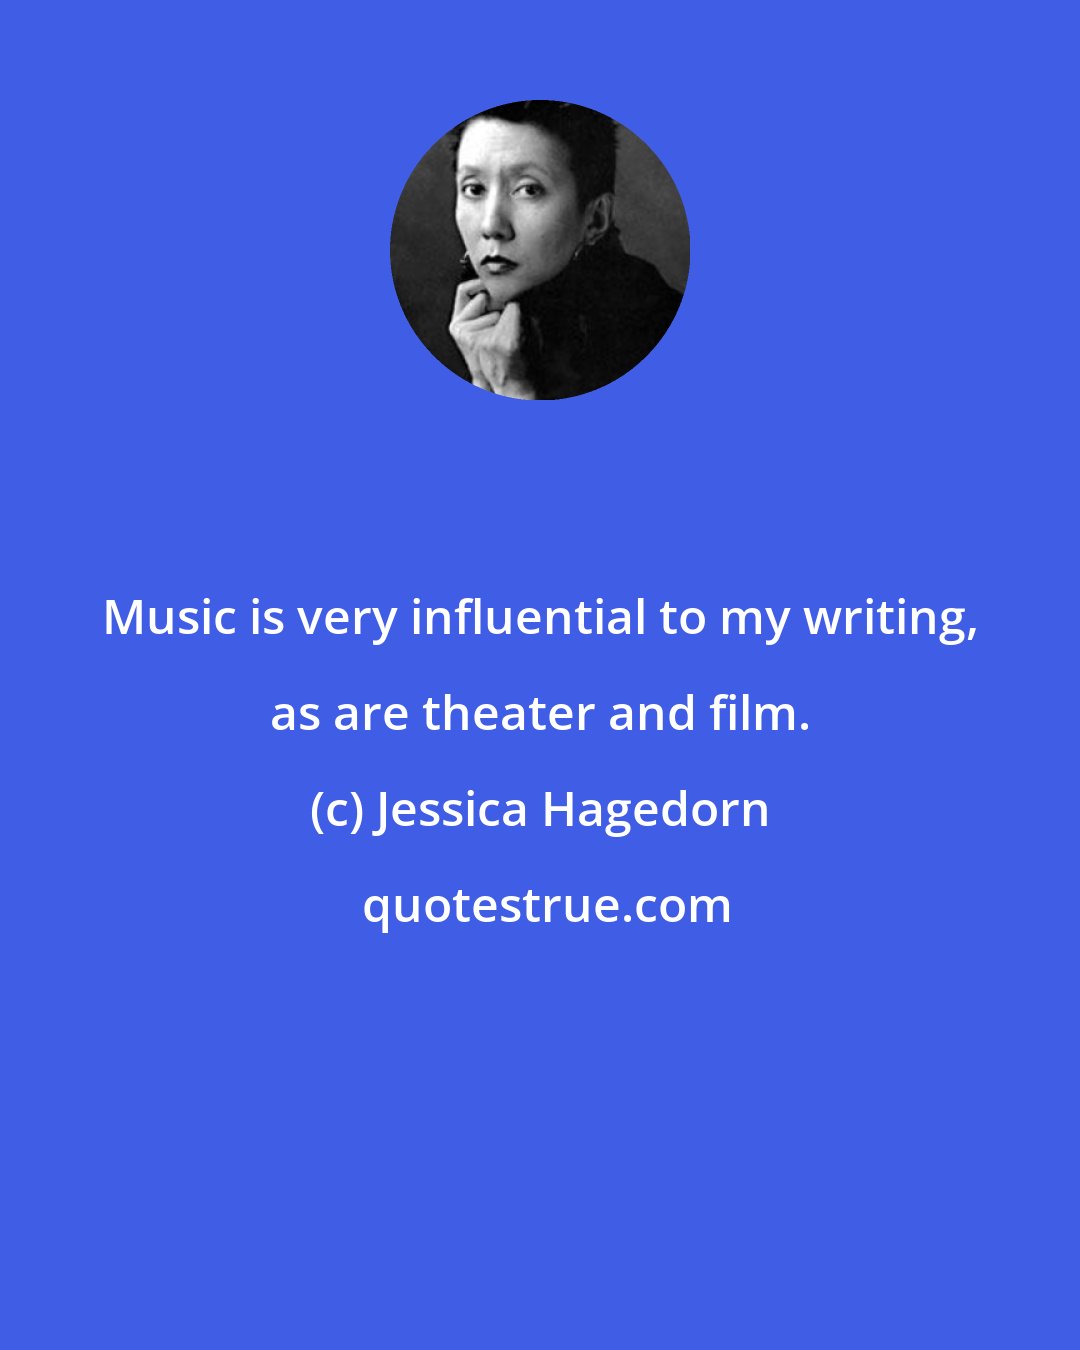 Jessica Hagedorn: Music is very influential to my writing, as are theater and film.